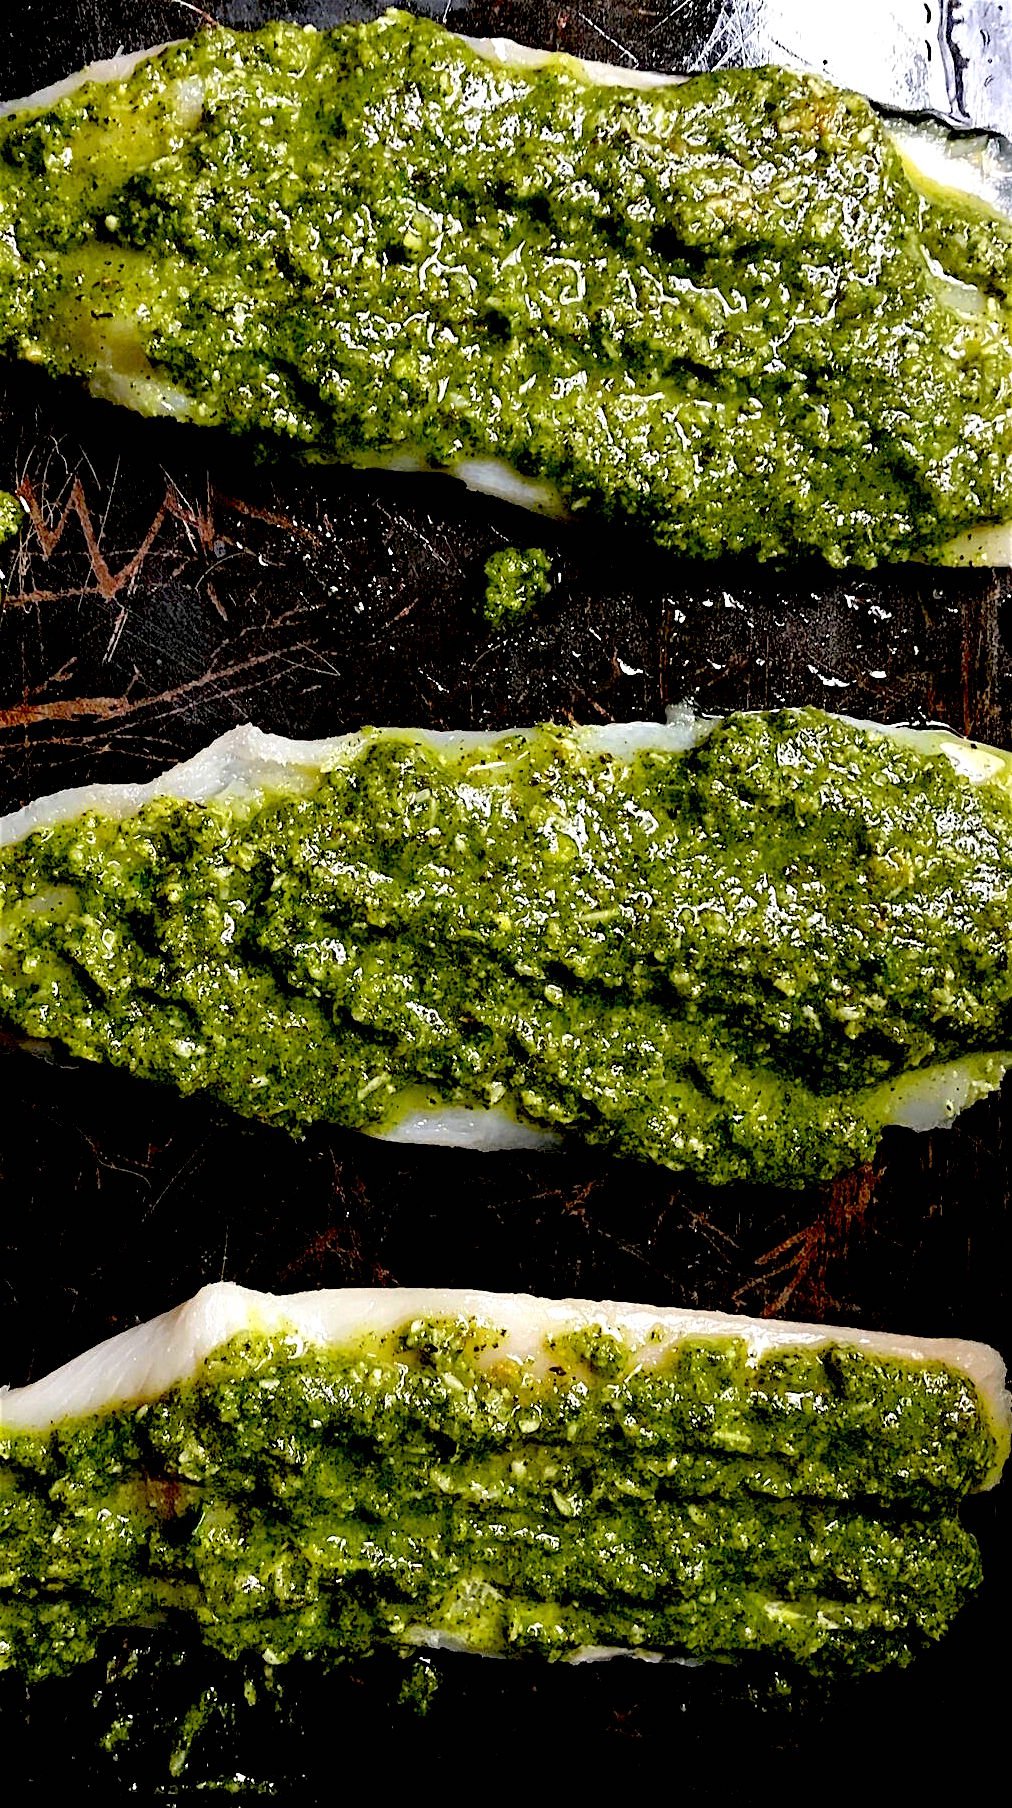 Mint and Coriander marinade on three pieces of Fish